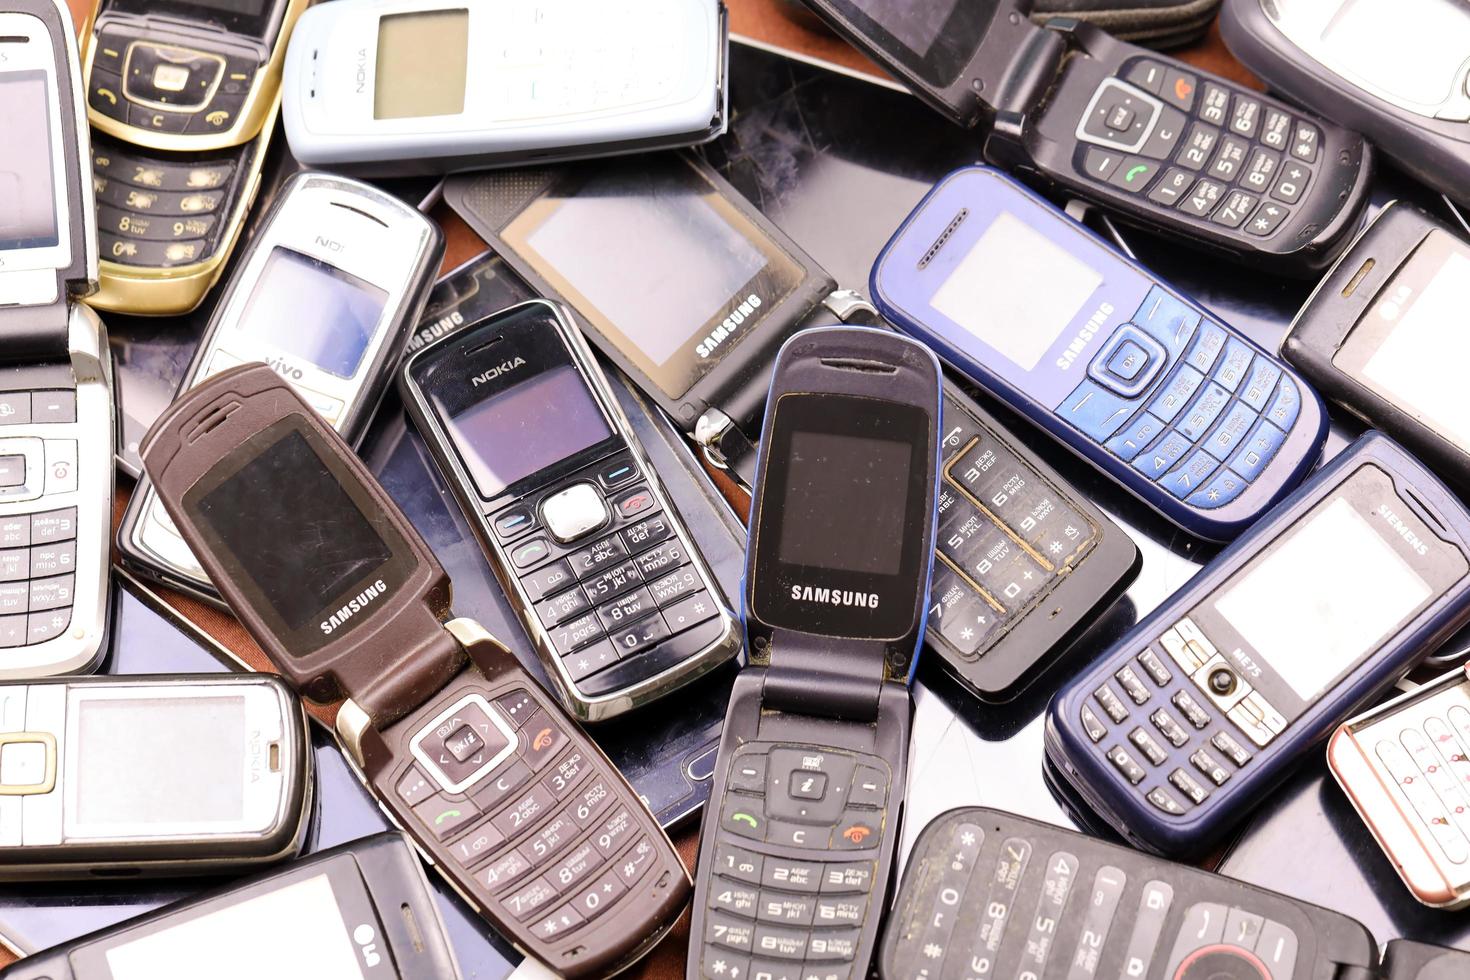 KHARKIV, UKRAINE - DECEMBER 16, 2021 Some old used outdated mobile phones from 90s-2000s period. Recycling electronics in the market photo